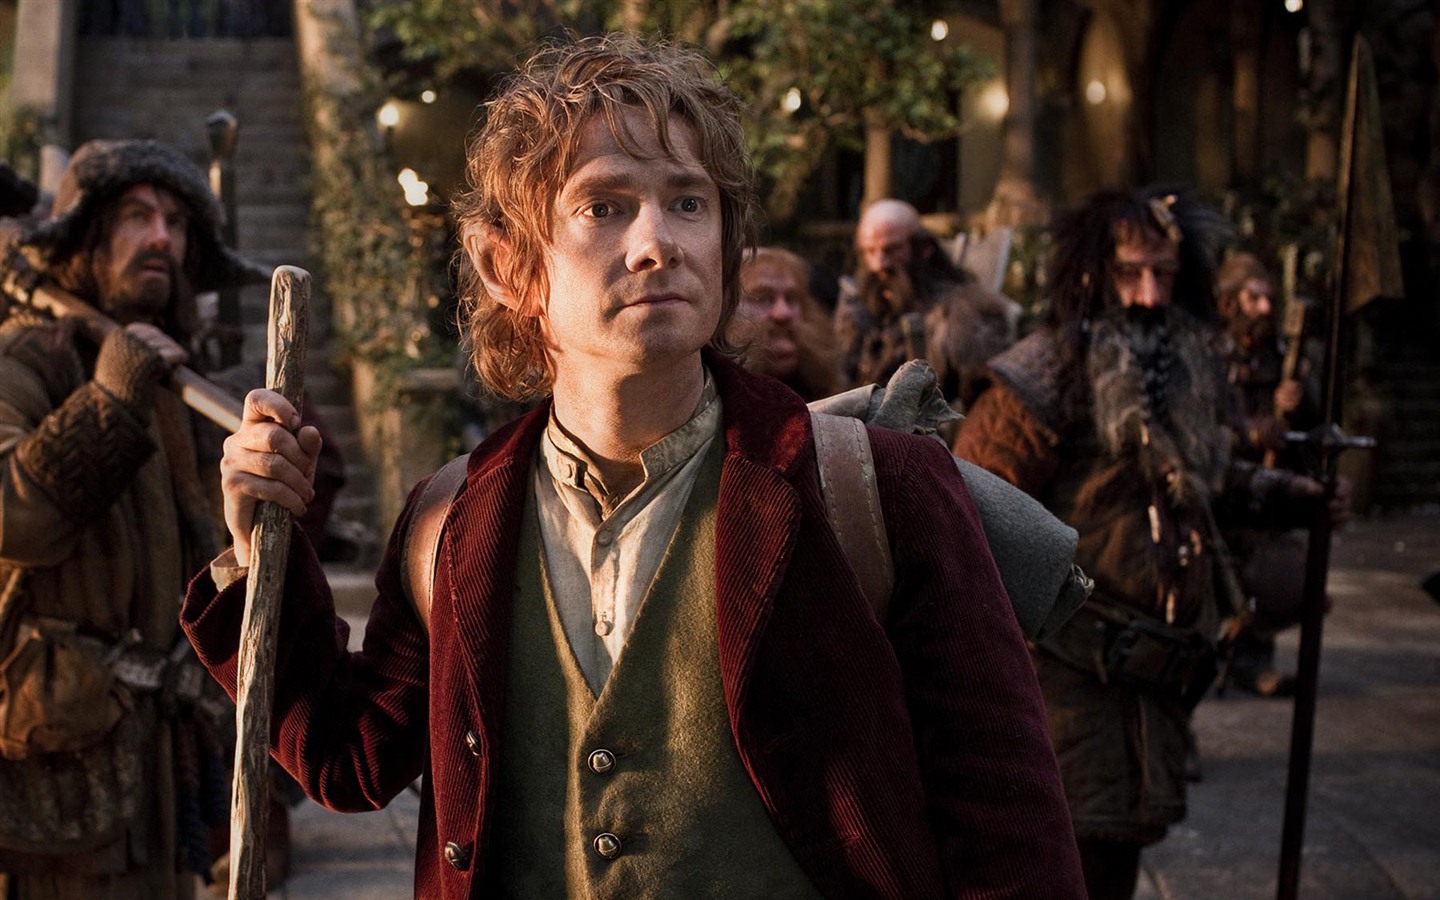 The Hobbit: An Unexpected Journey HD wallpapers #3 - 1440x900